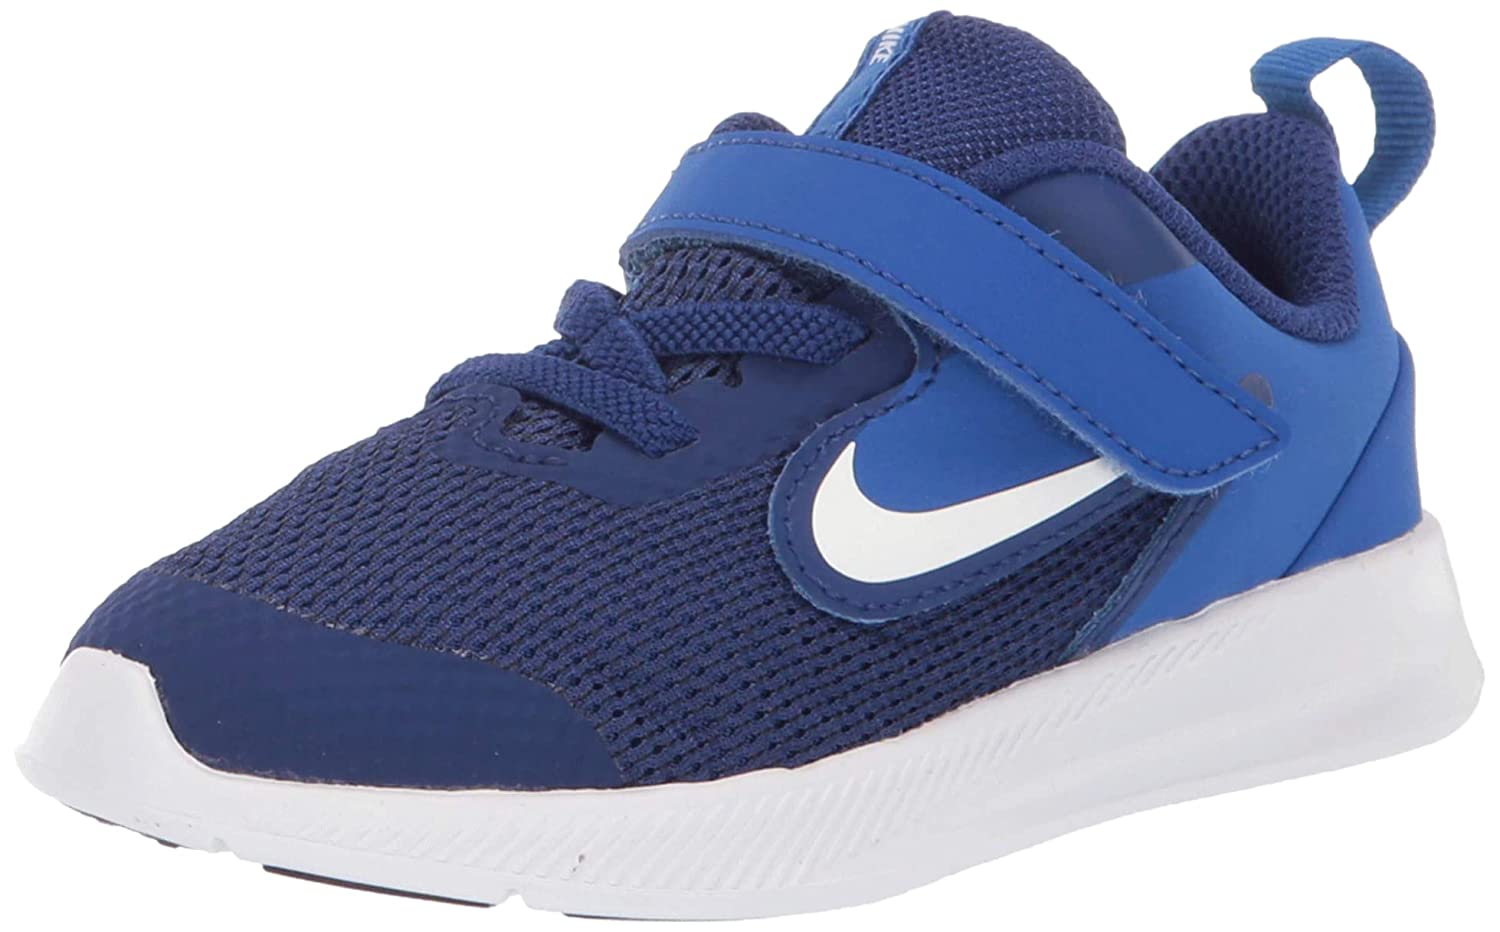 Nike Unisex-Child Downshifter Running Shoes